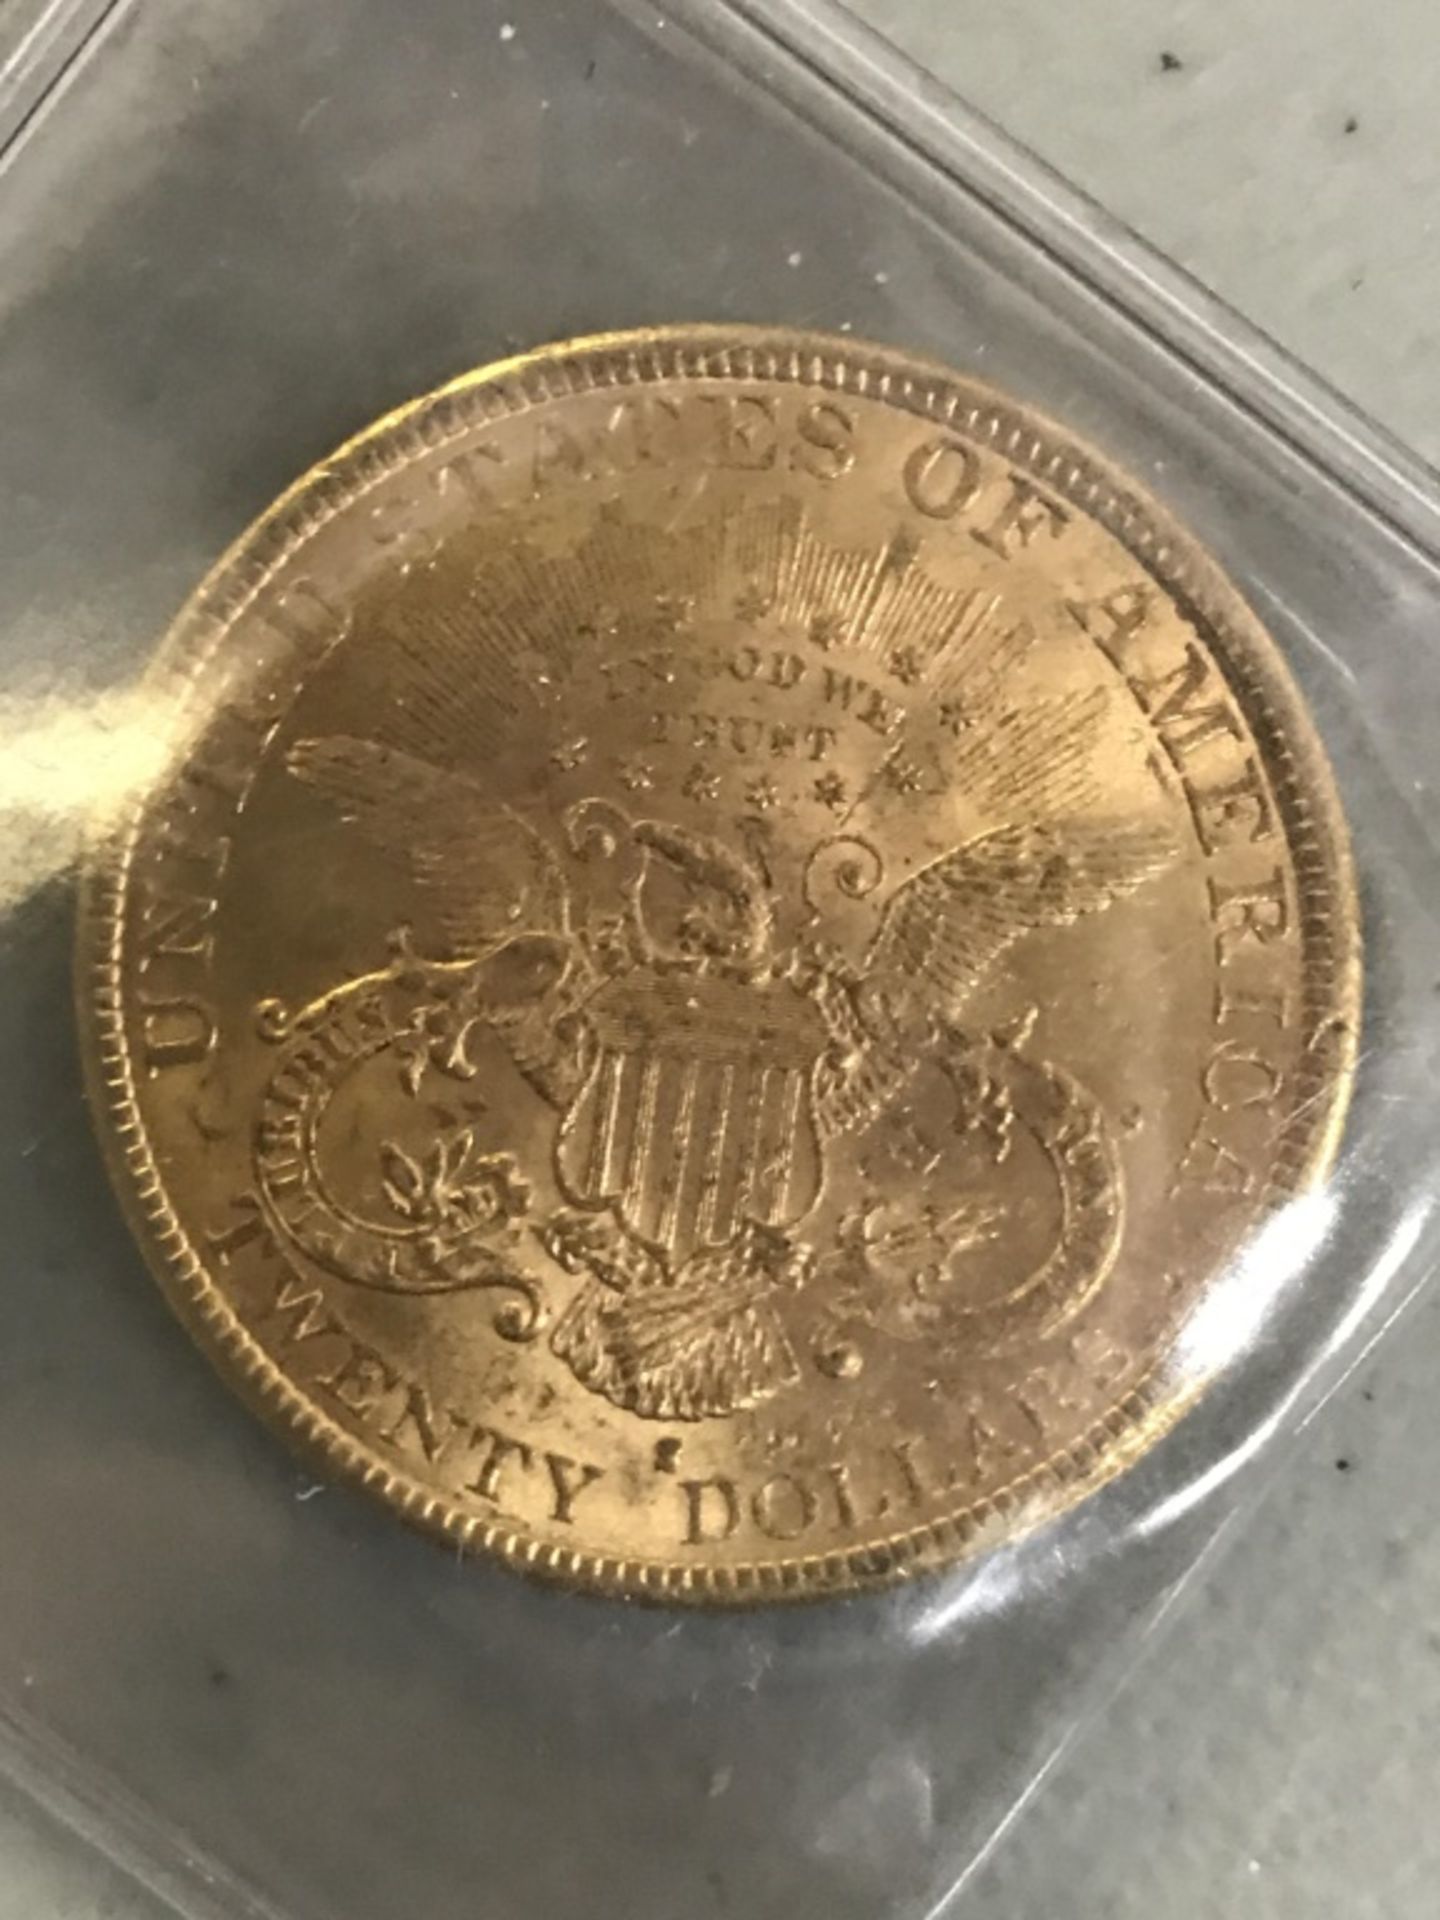 $20 Us Gold 1892 Coin - Image 7 of 9